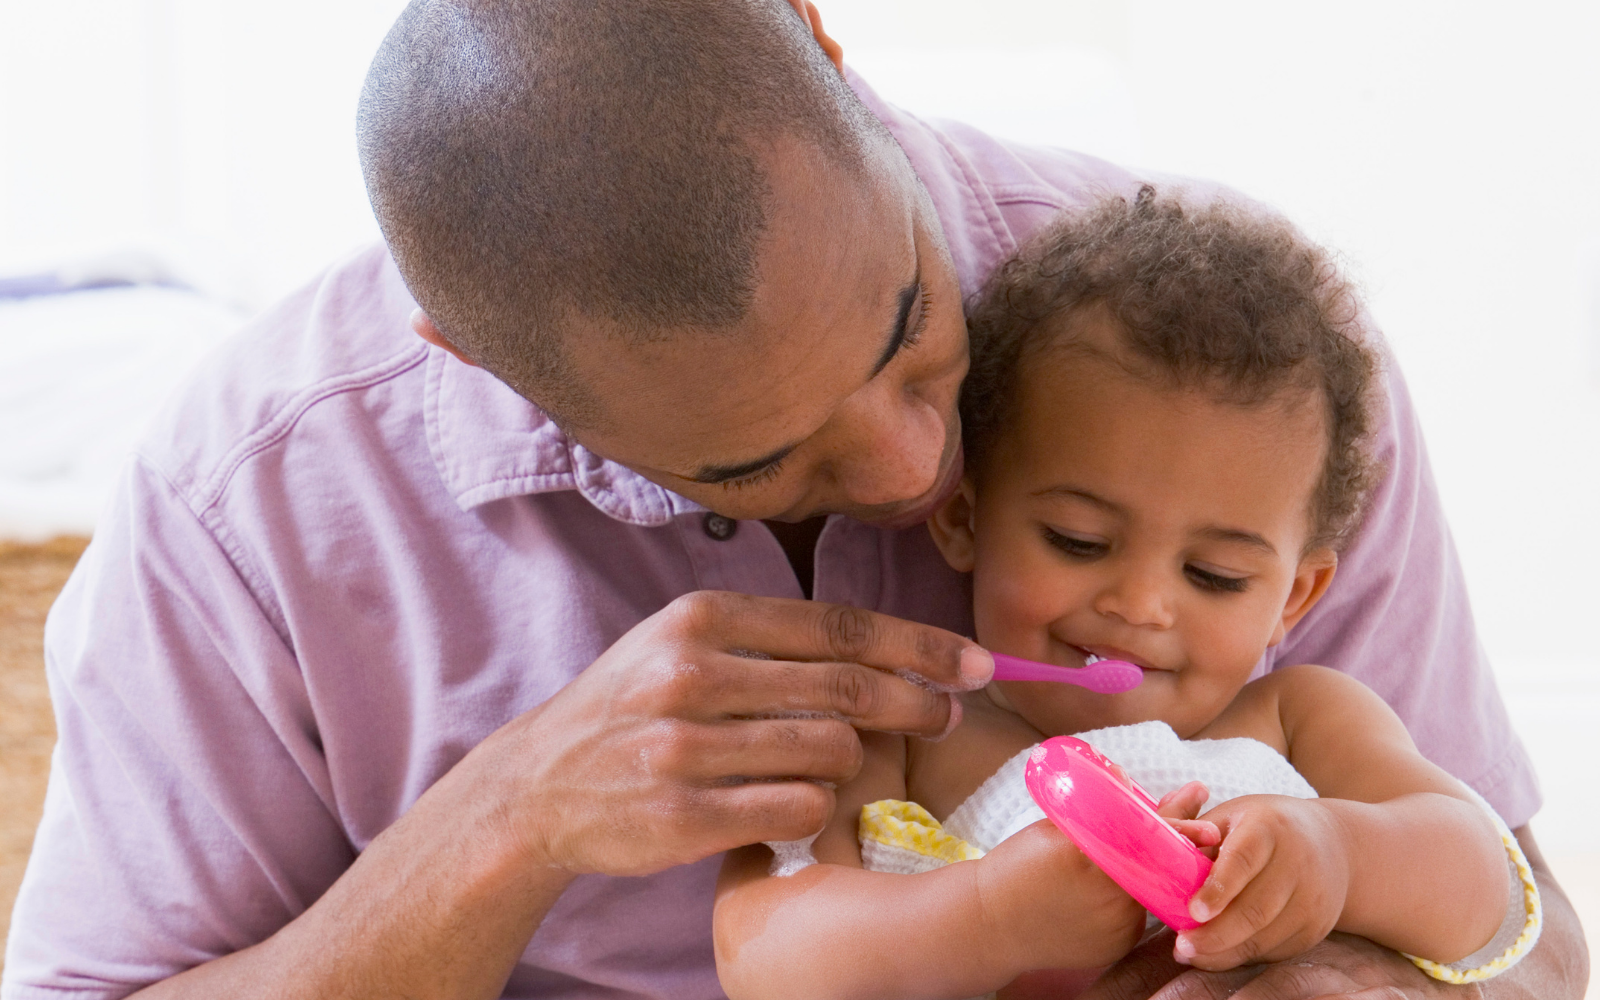 Brushing Baby Teeth: When to Start, How To Do It, and More